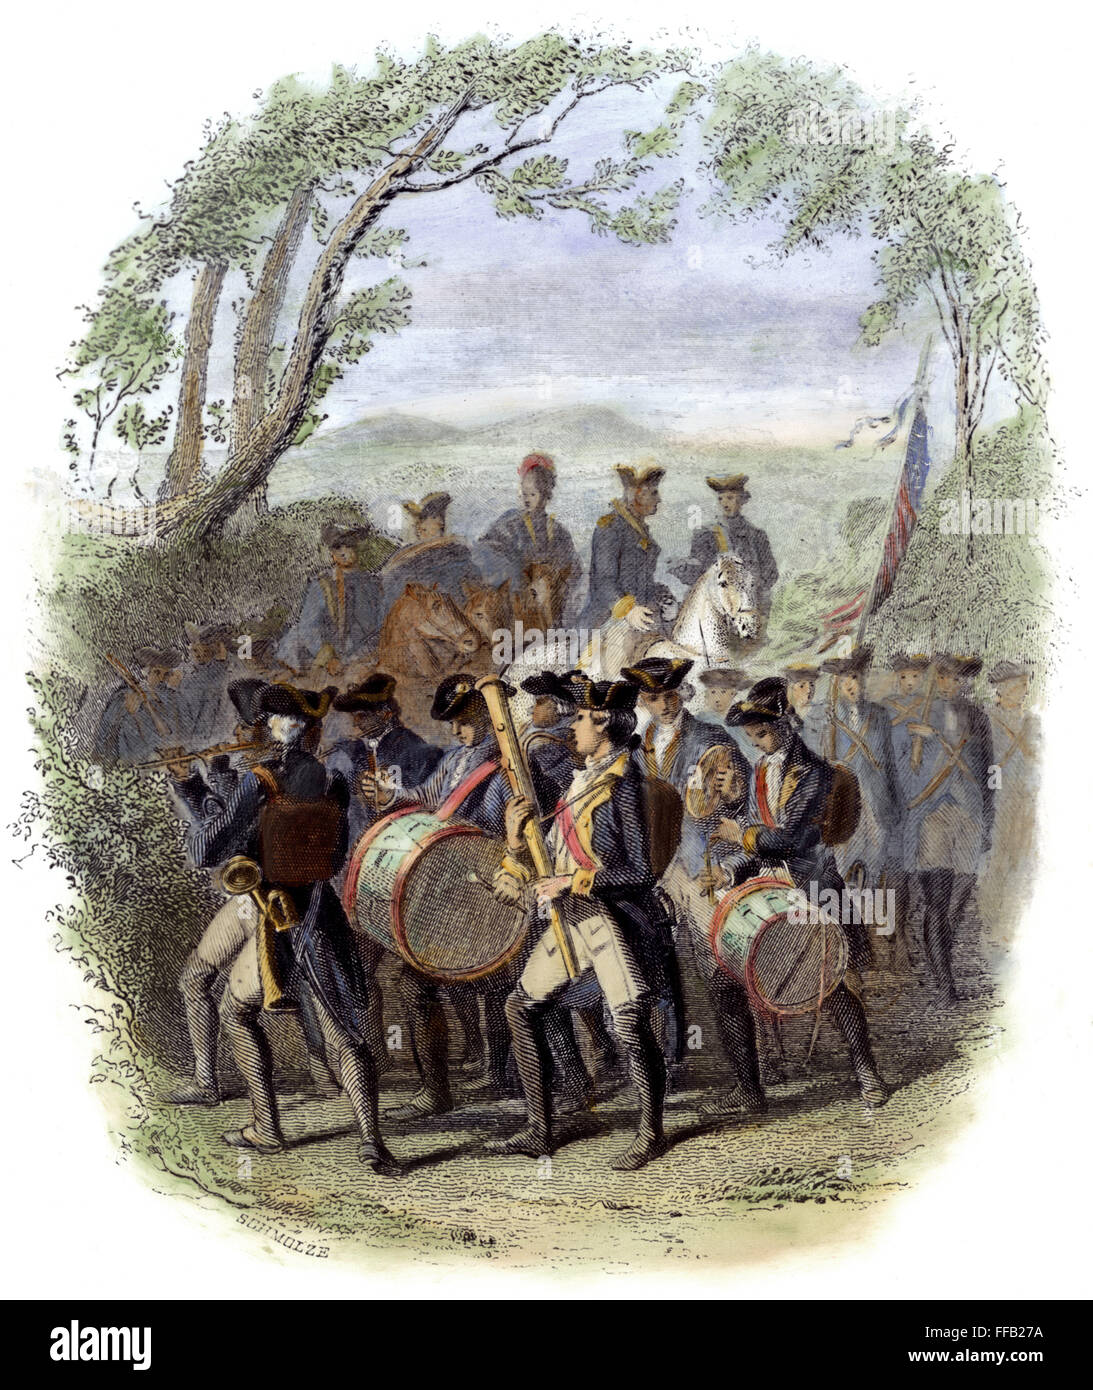 CONTINENTAL ARMY BAND. /nMarching band in the Continental Army during the American Revolutionary War. Colored engraving, c1850, by Karl Hermann Schmolze. Stock Photo